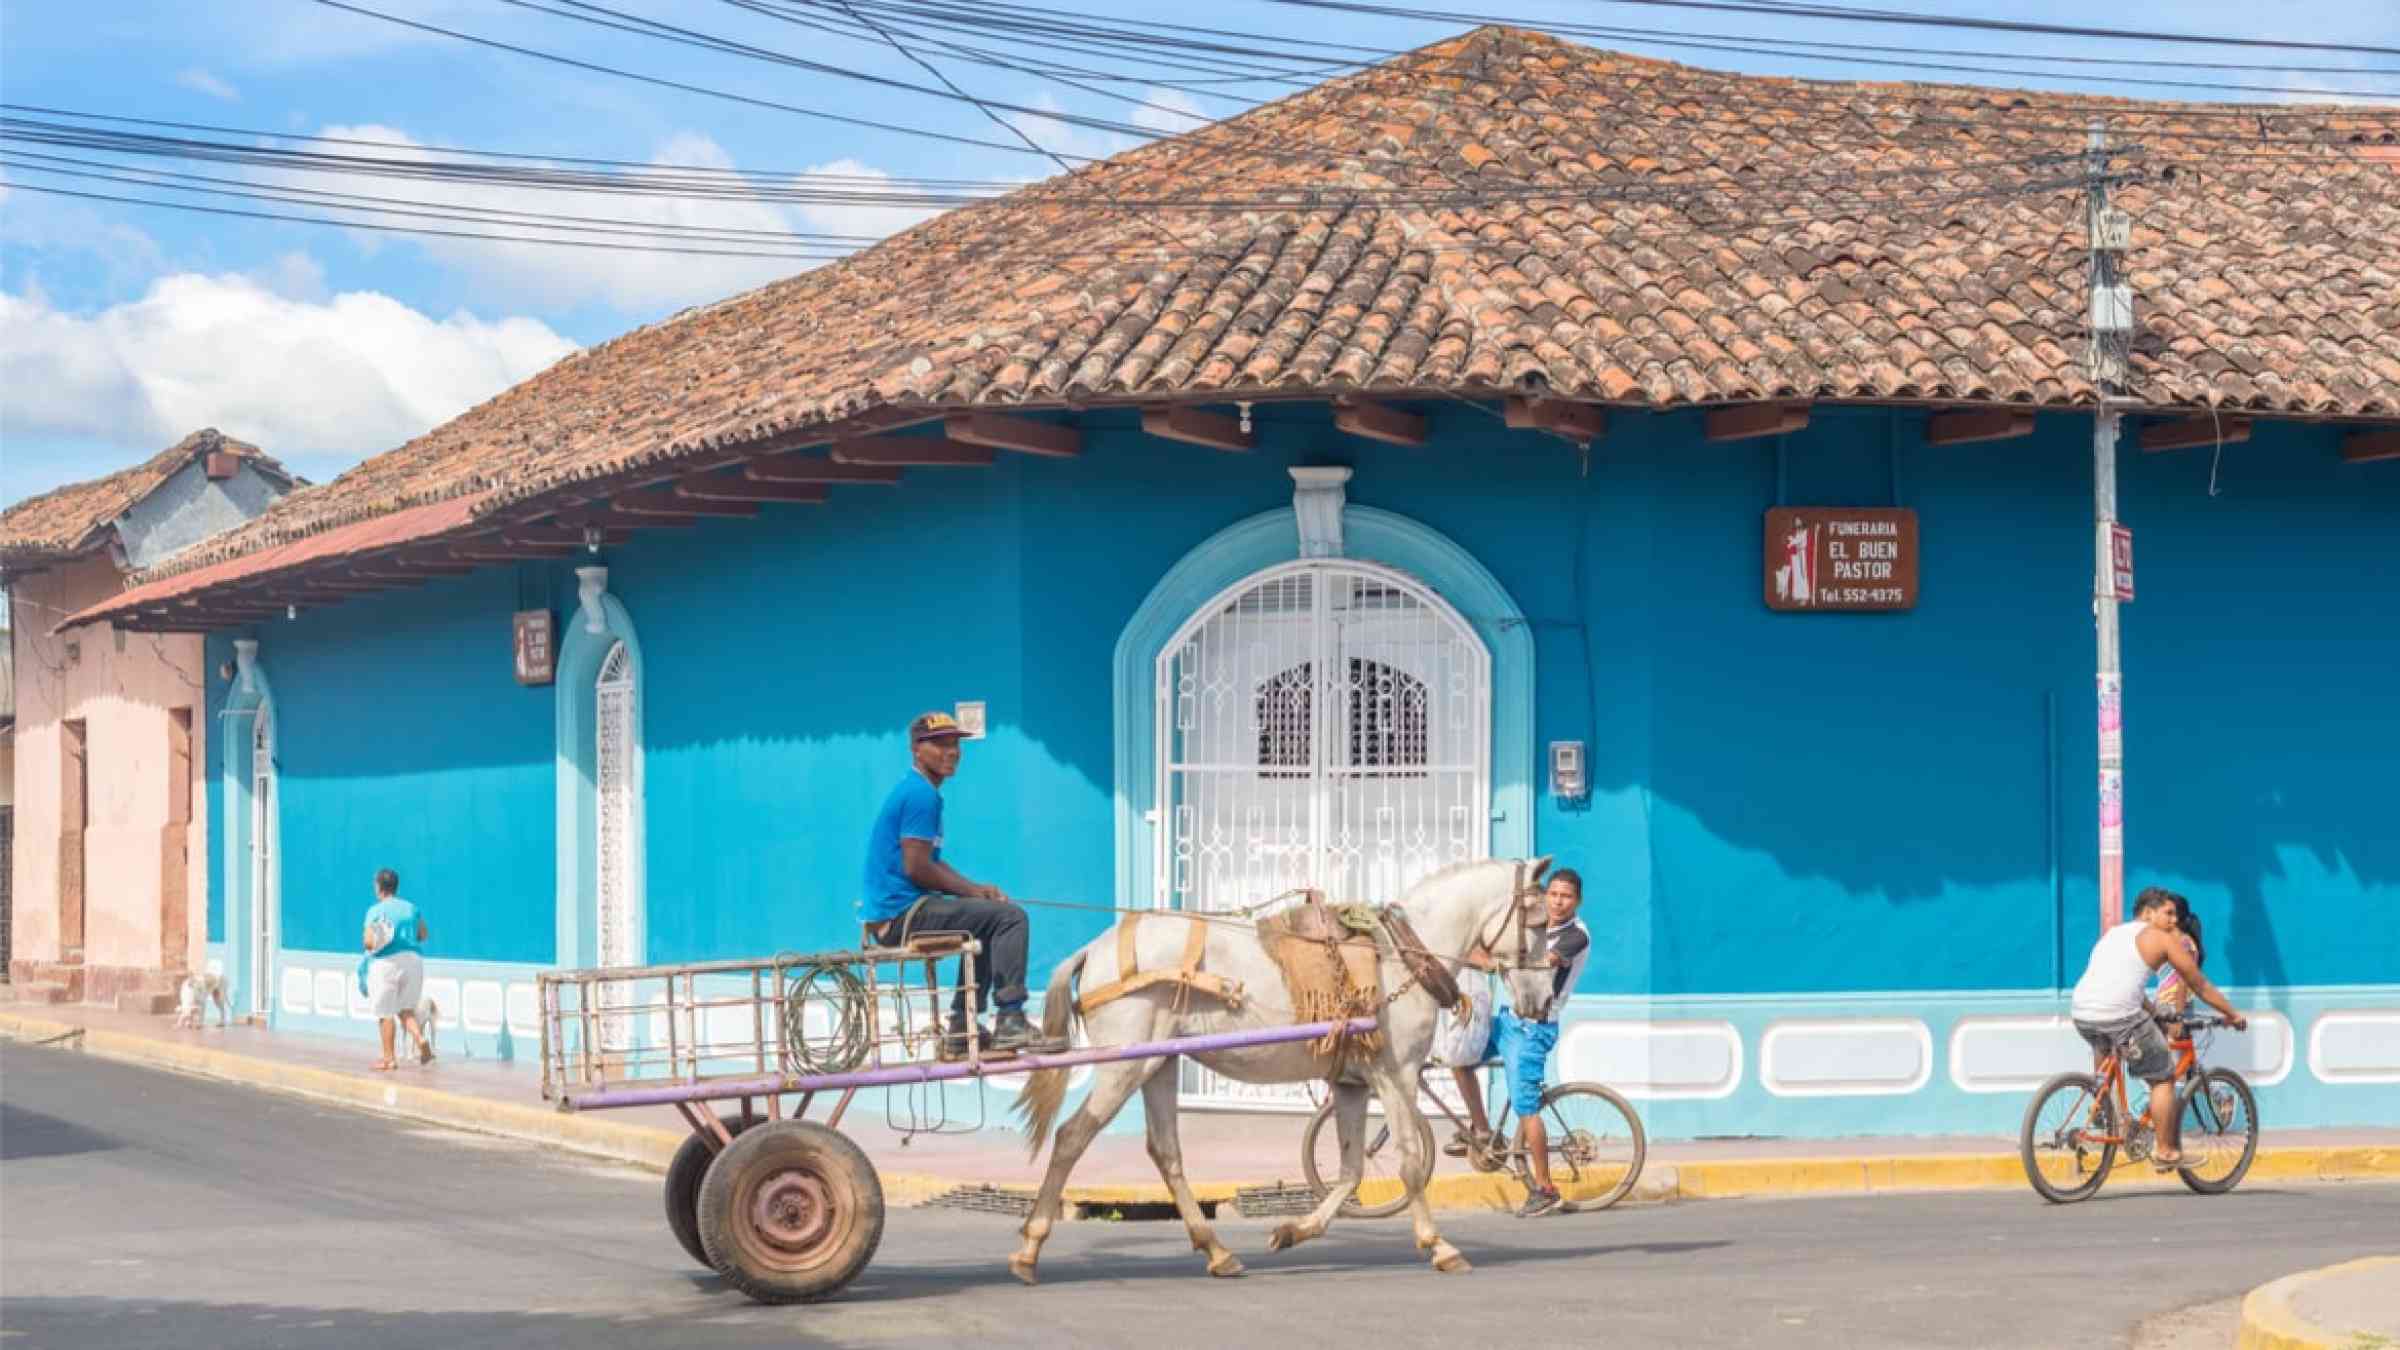 People riding bicycles on the street of colorful commercial houses in the historic district of Granada, Nicaragua